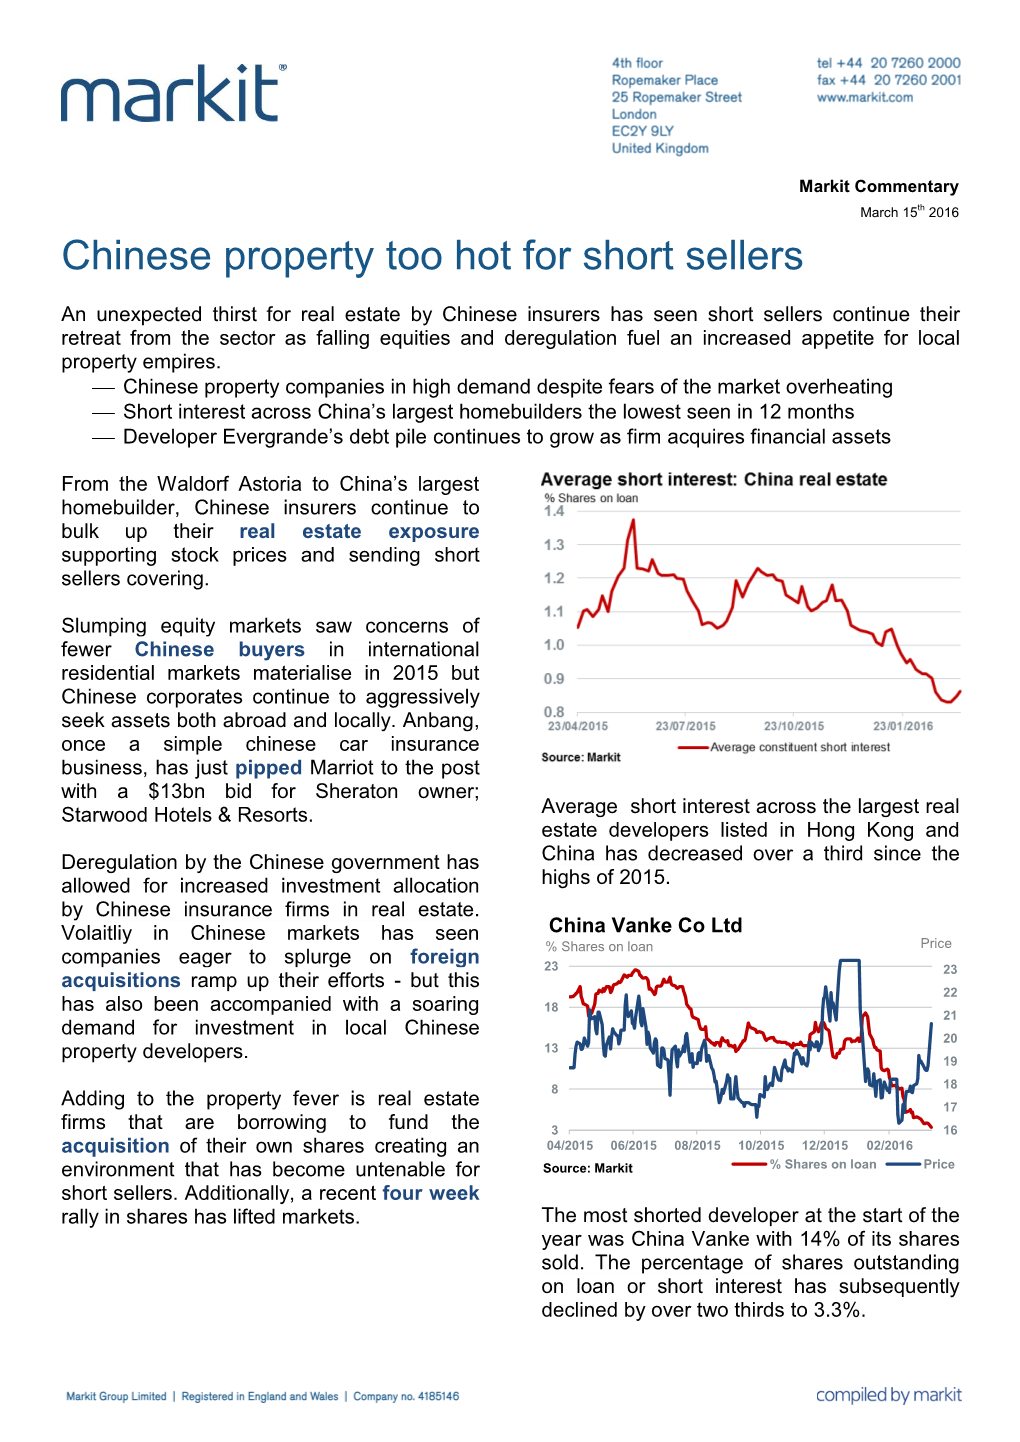 Chinese Property Too Hot for Short Sellers